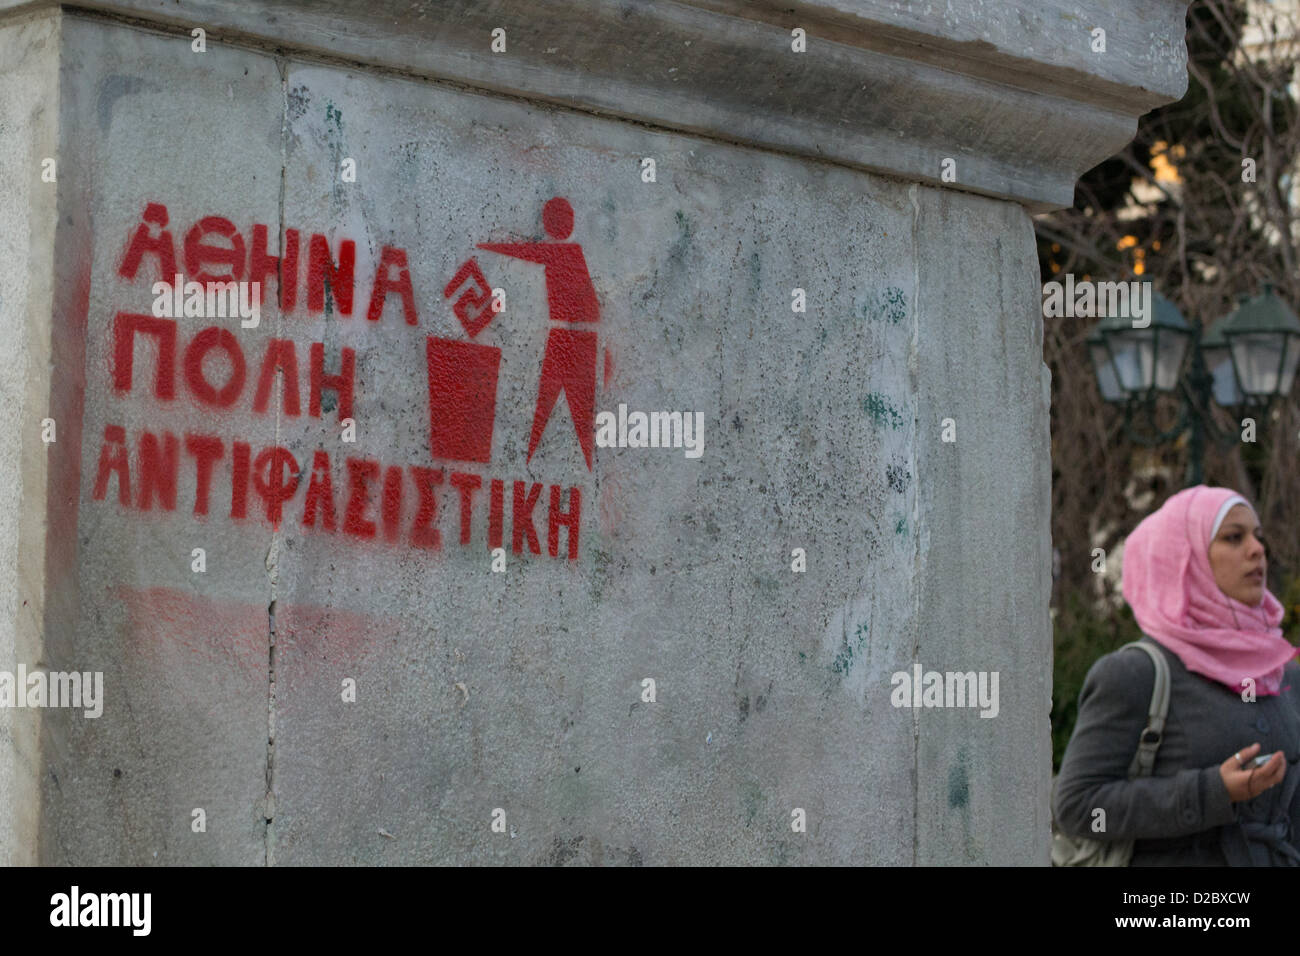 Athens, Greece, 19th Januray 2013. Immigrants and locals take to the streets to condemn fascism and protest against racist attacks and the neo-nazi party Golden Dawn. Stencil on marble reads 'Athens, an antifascist city'. Credit:  Nikolas Georgiou / Alamy Live News Stock Photo